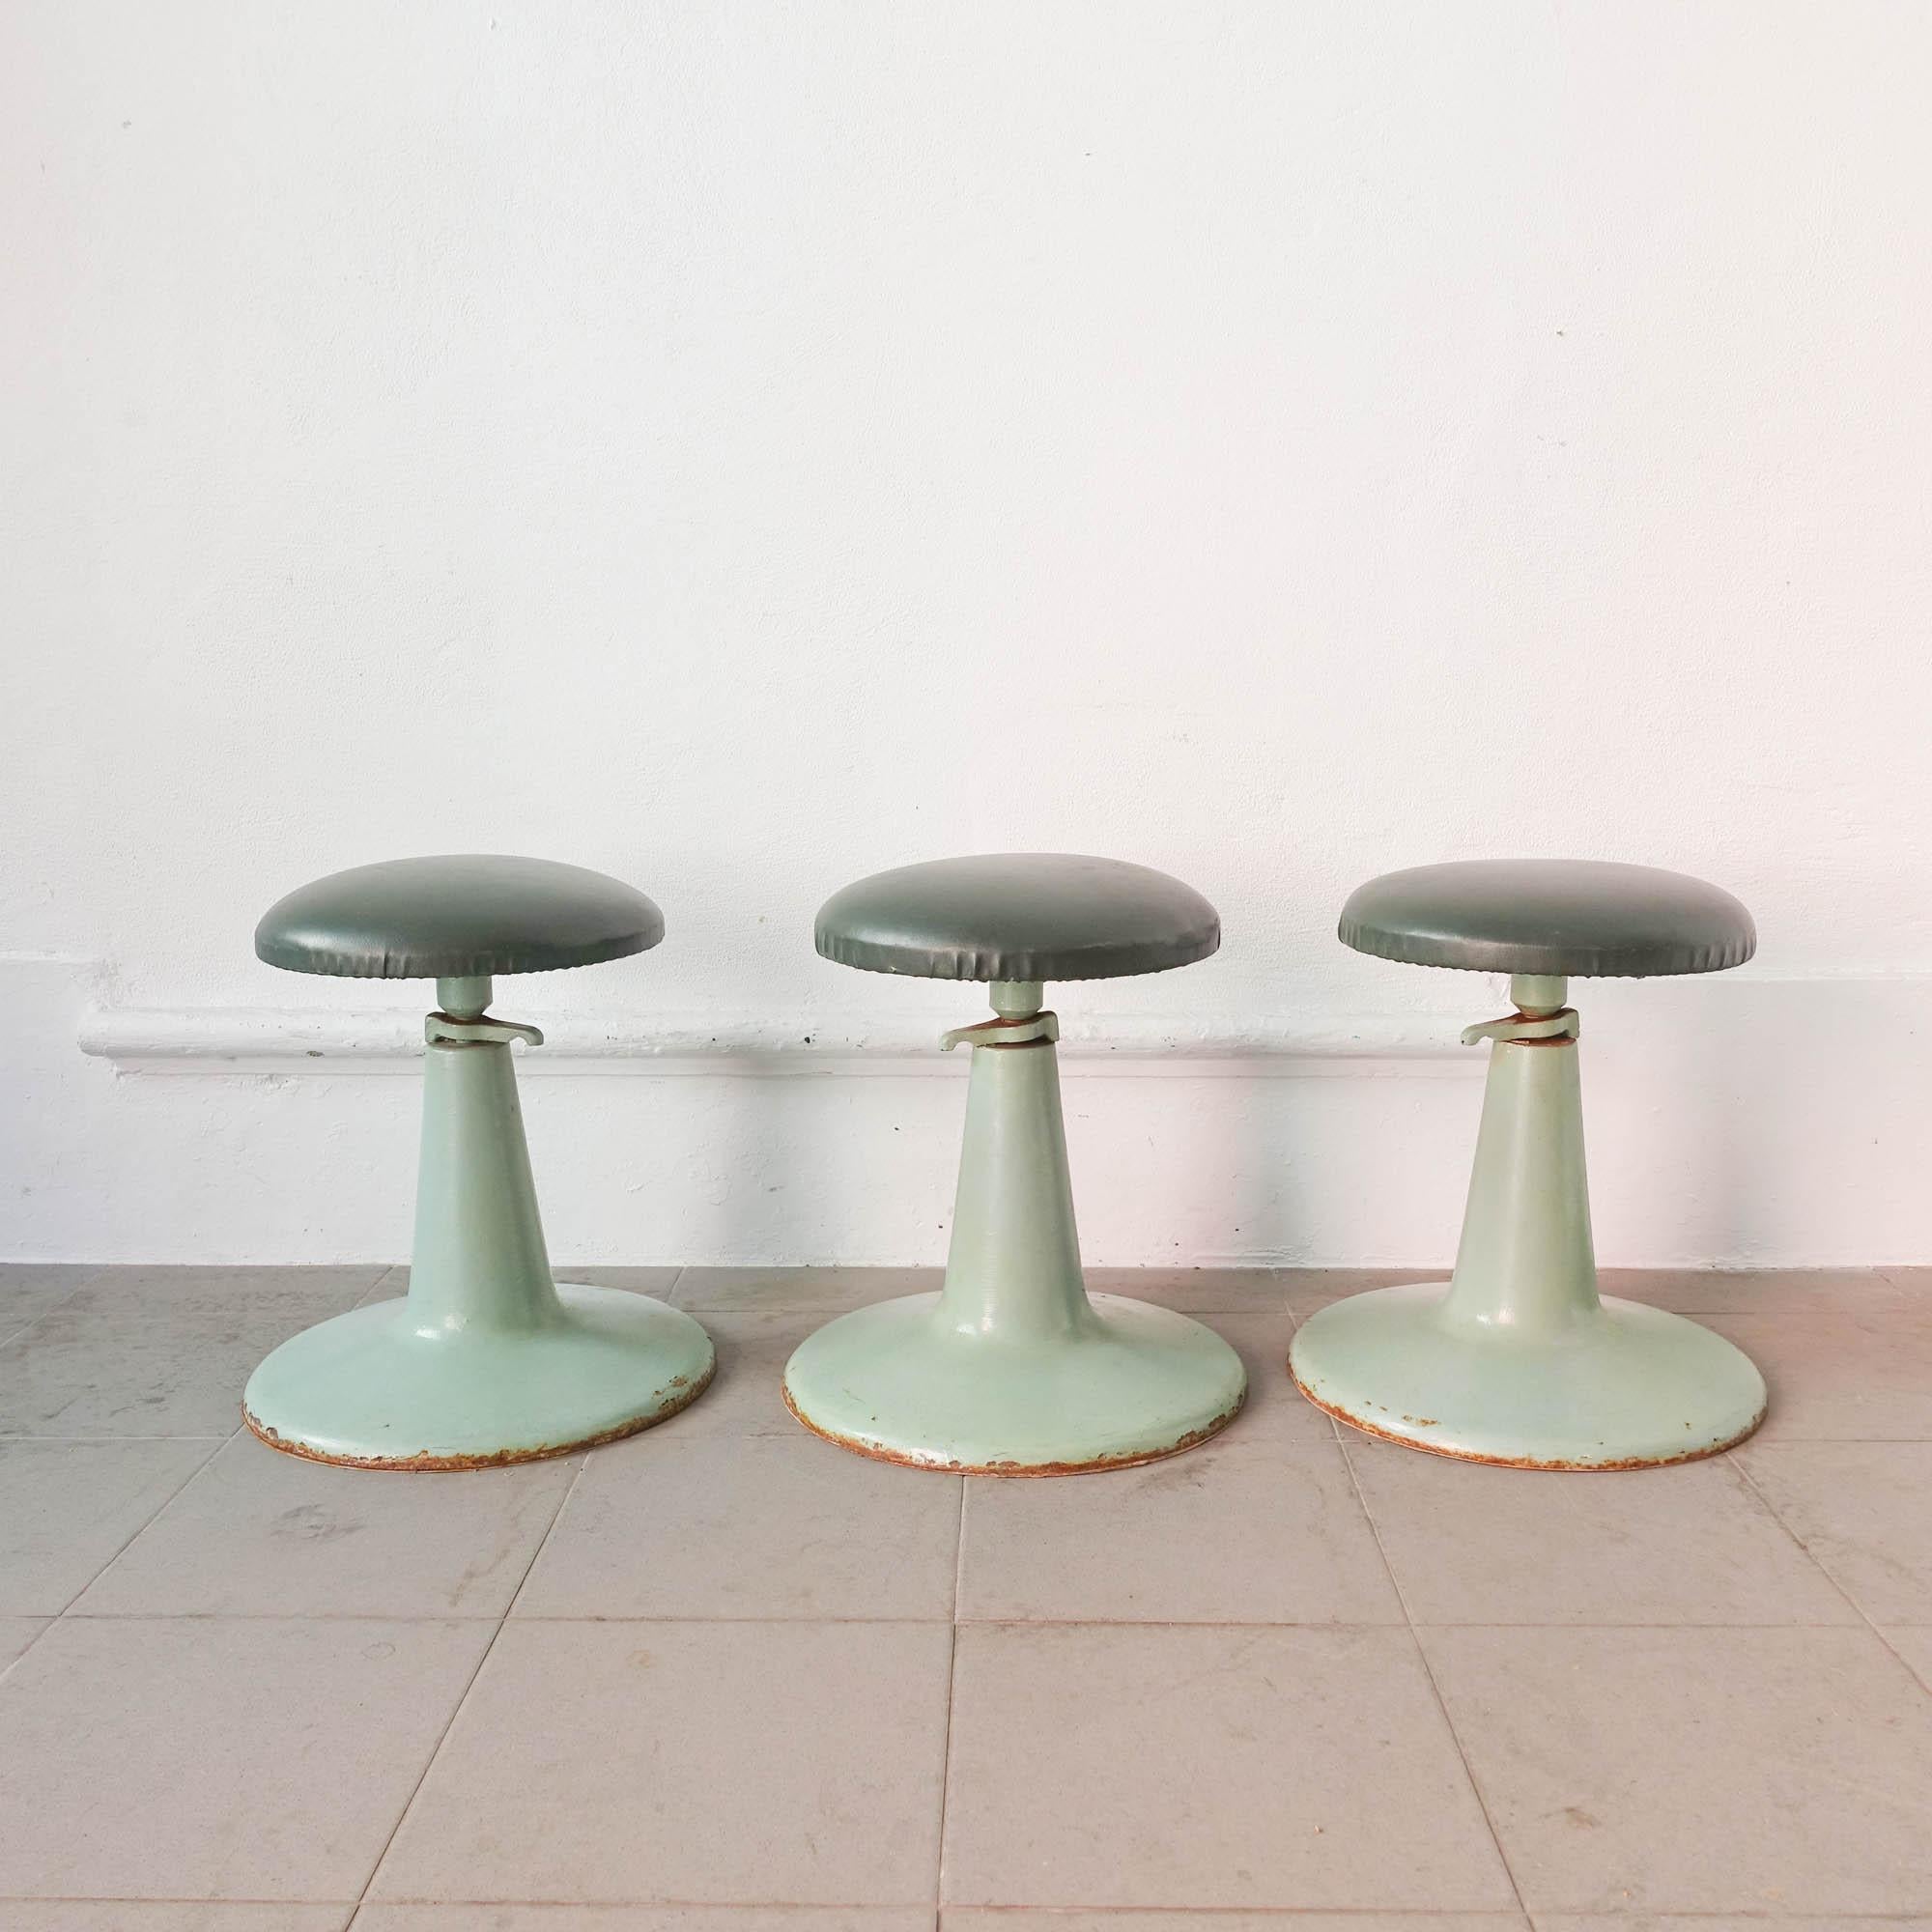 This stool was produced in United Kingdom during the 1950's and it belonged to a dentist office. It has a tulip shape cast iron base, painted in mint green and a dark green synthetic leather seat. In original and good condition. The price is per